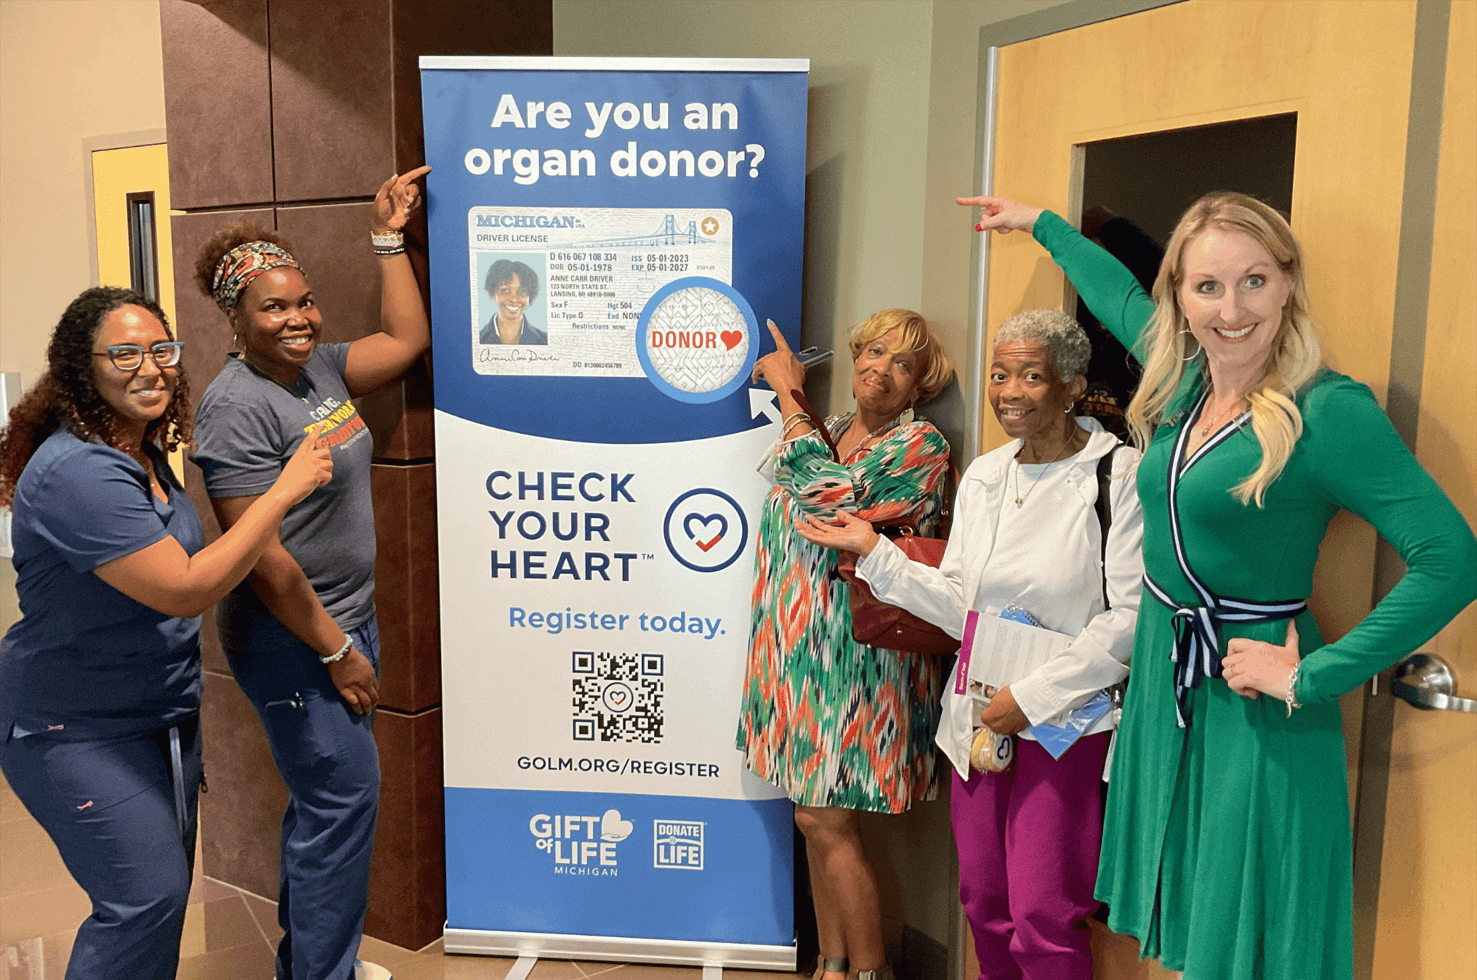 Five women pointing to a vertical banner that asks "Are you an organ donor?" with a driver's license image below that.